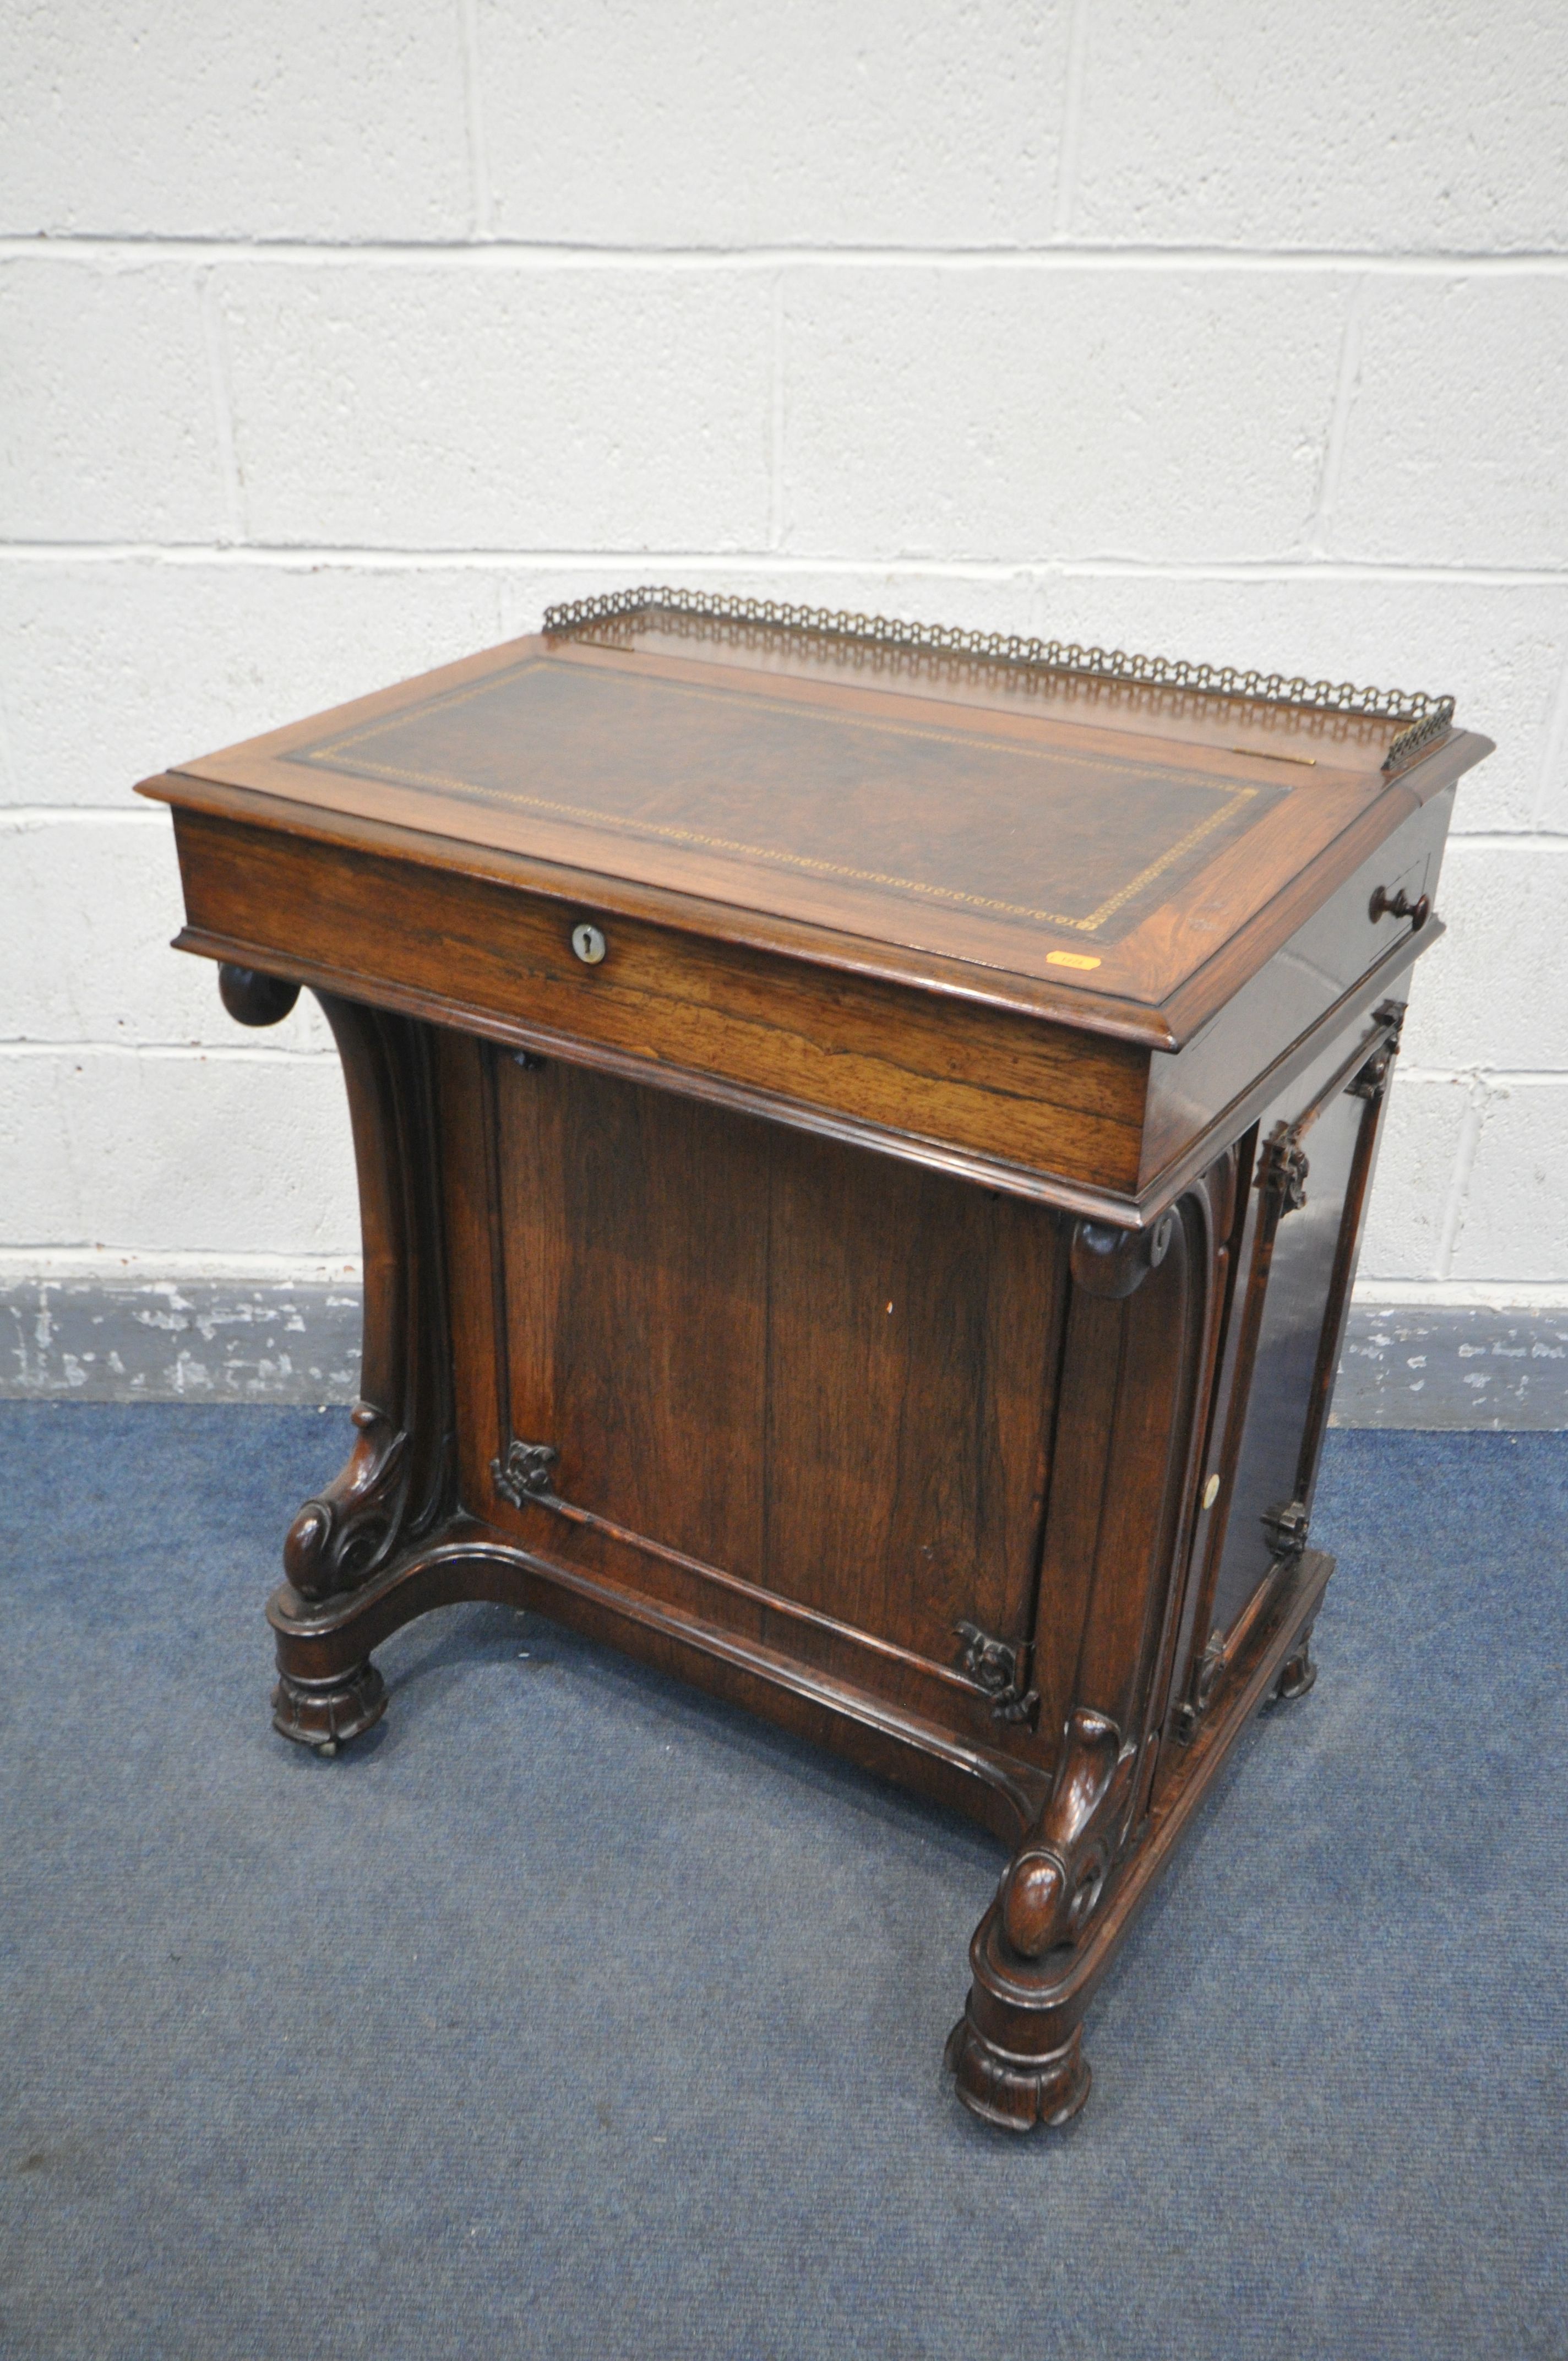 AN EARLY 19TH CENTURY ROSEWOOD DAVENPORT DESK, having a brass open fretwork gallery behind a leather